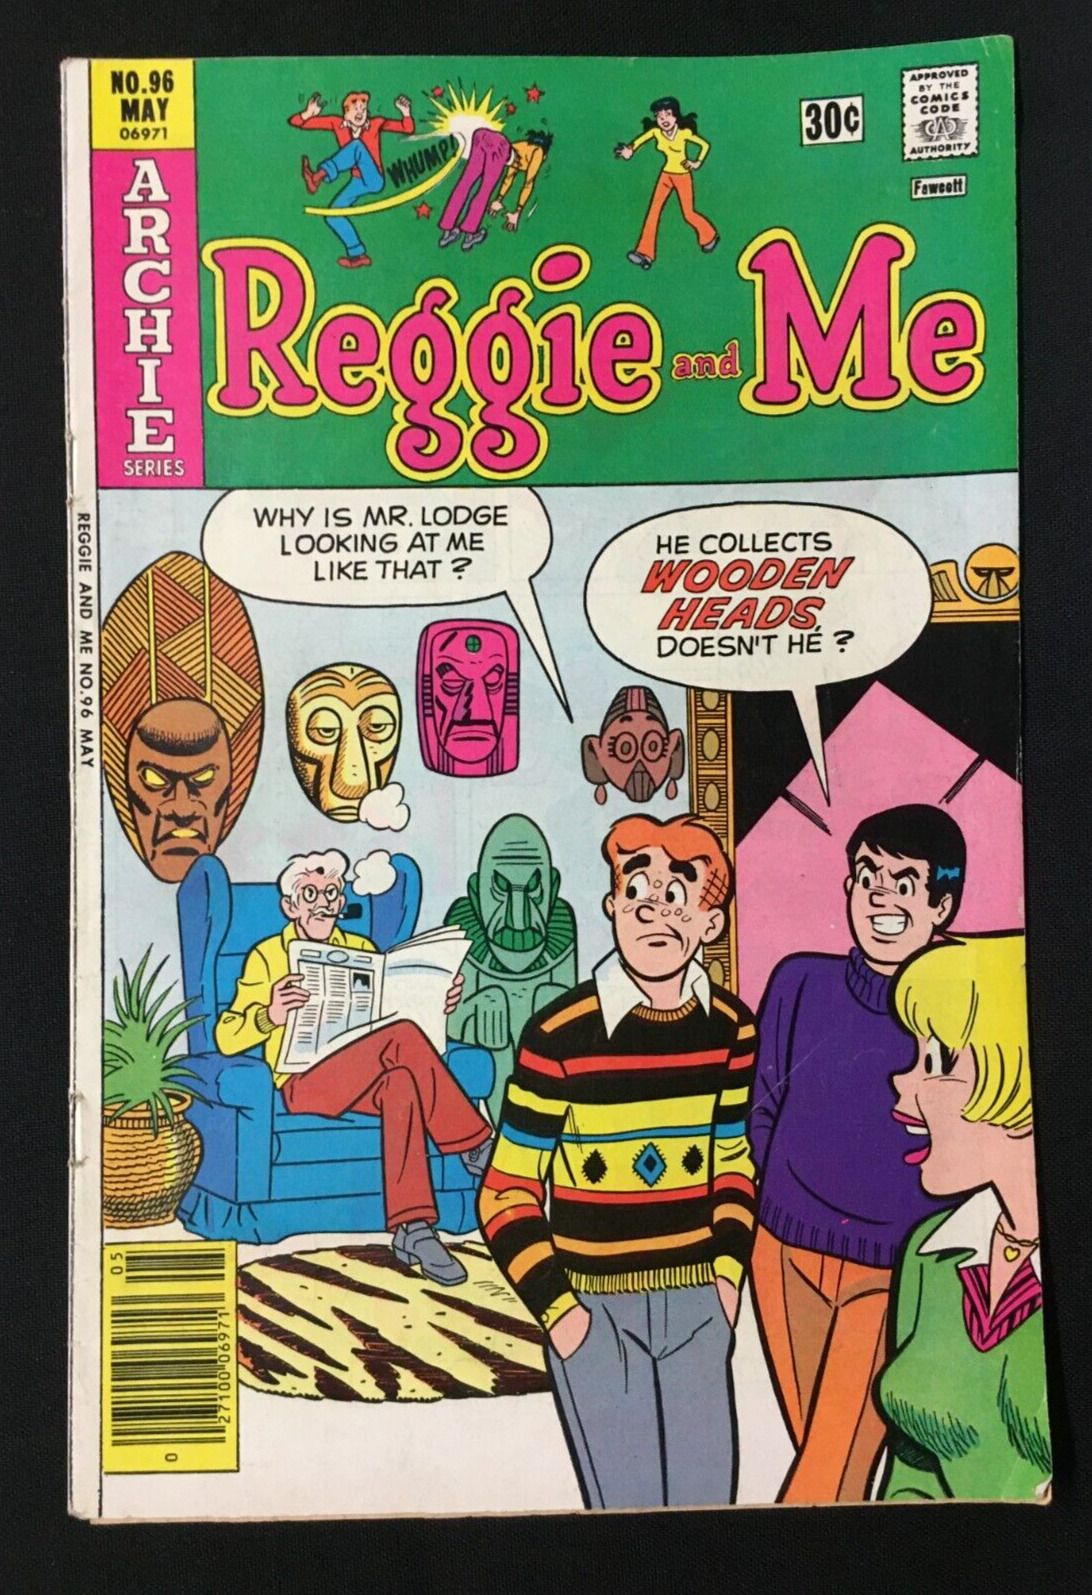 REGGIE AND ME 96 MAY ARCHIE COMICS VOL 1 1977 FAWCETT 20 CENT BOOK VINTAGE